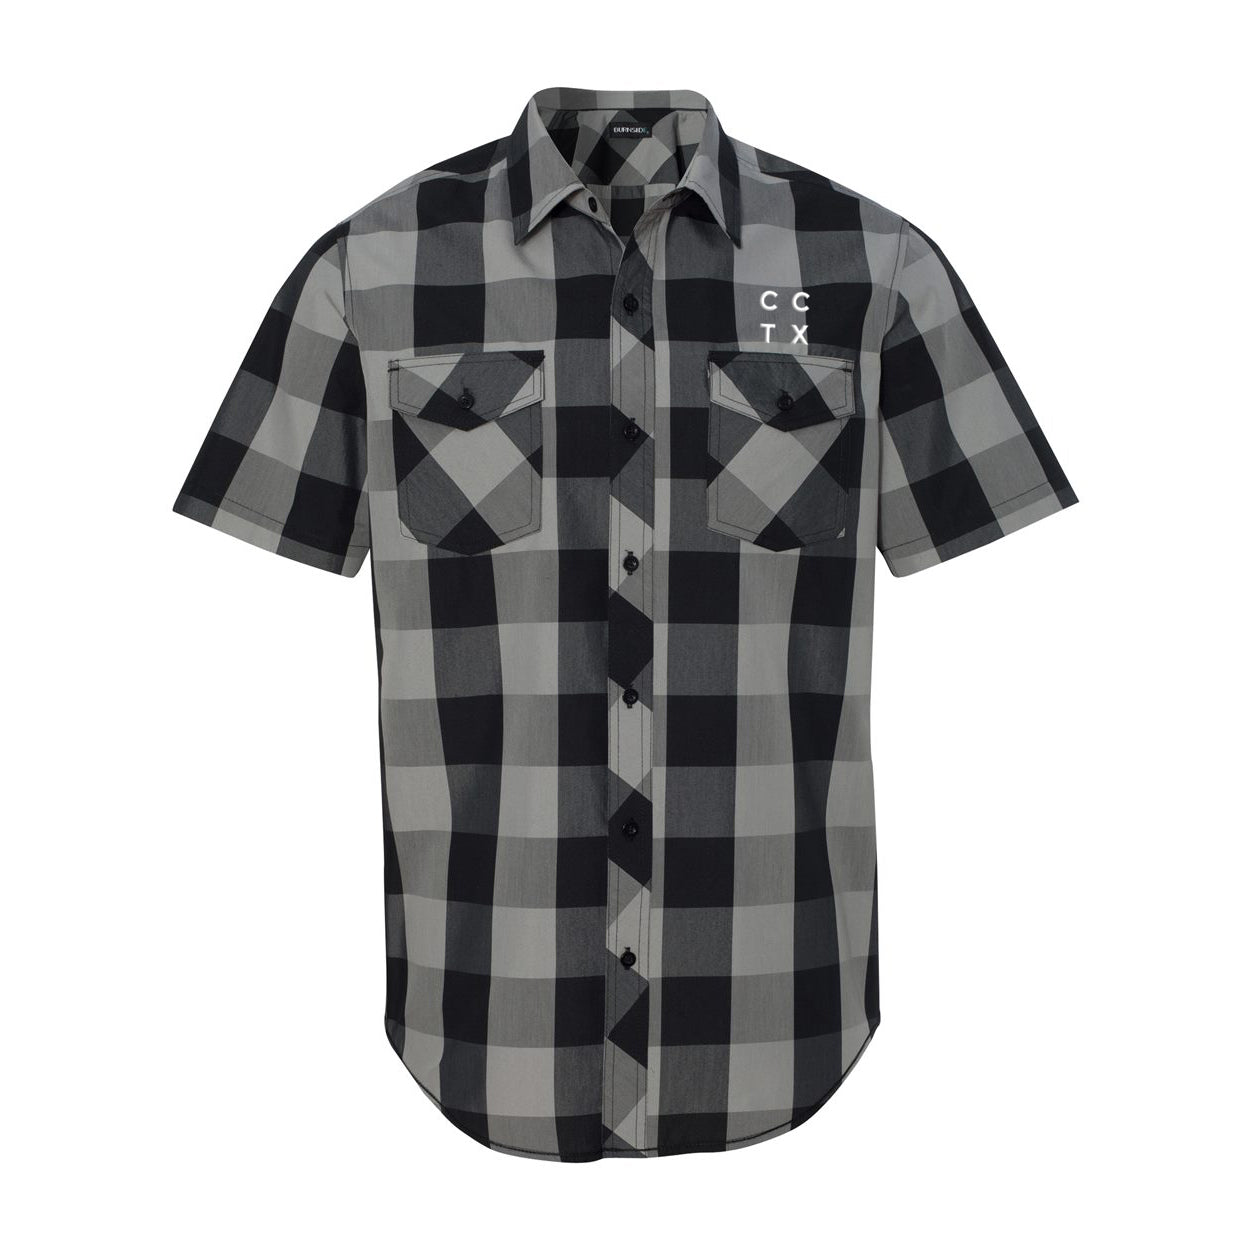 CCTX Stacked Button Down Shirt